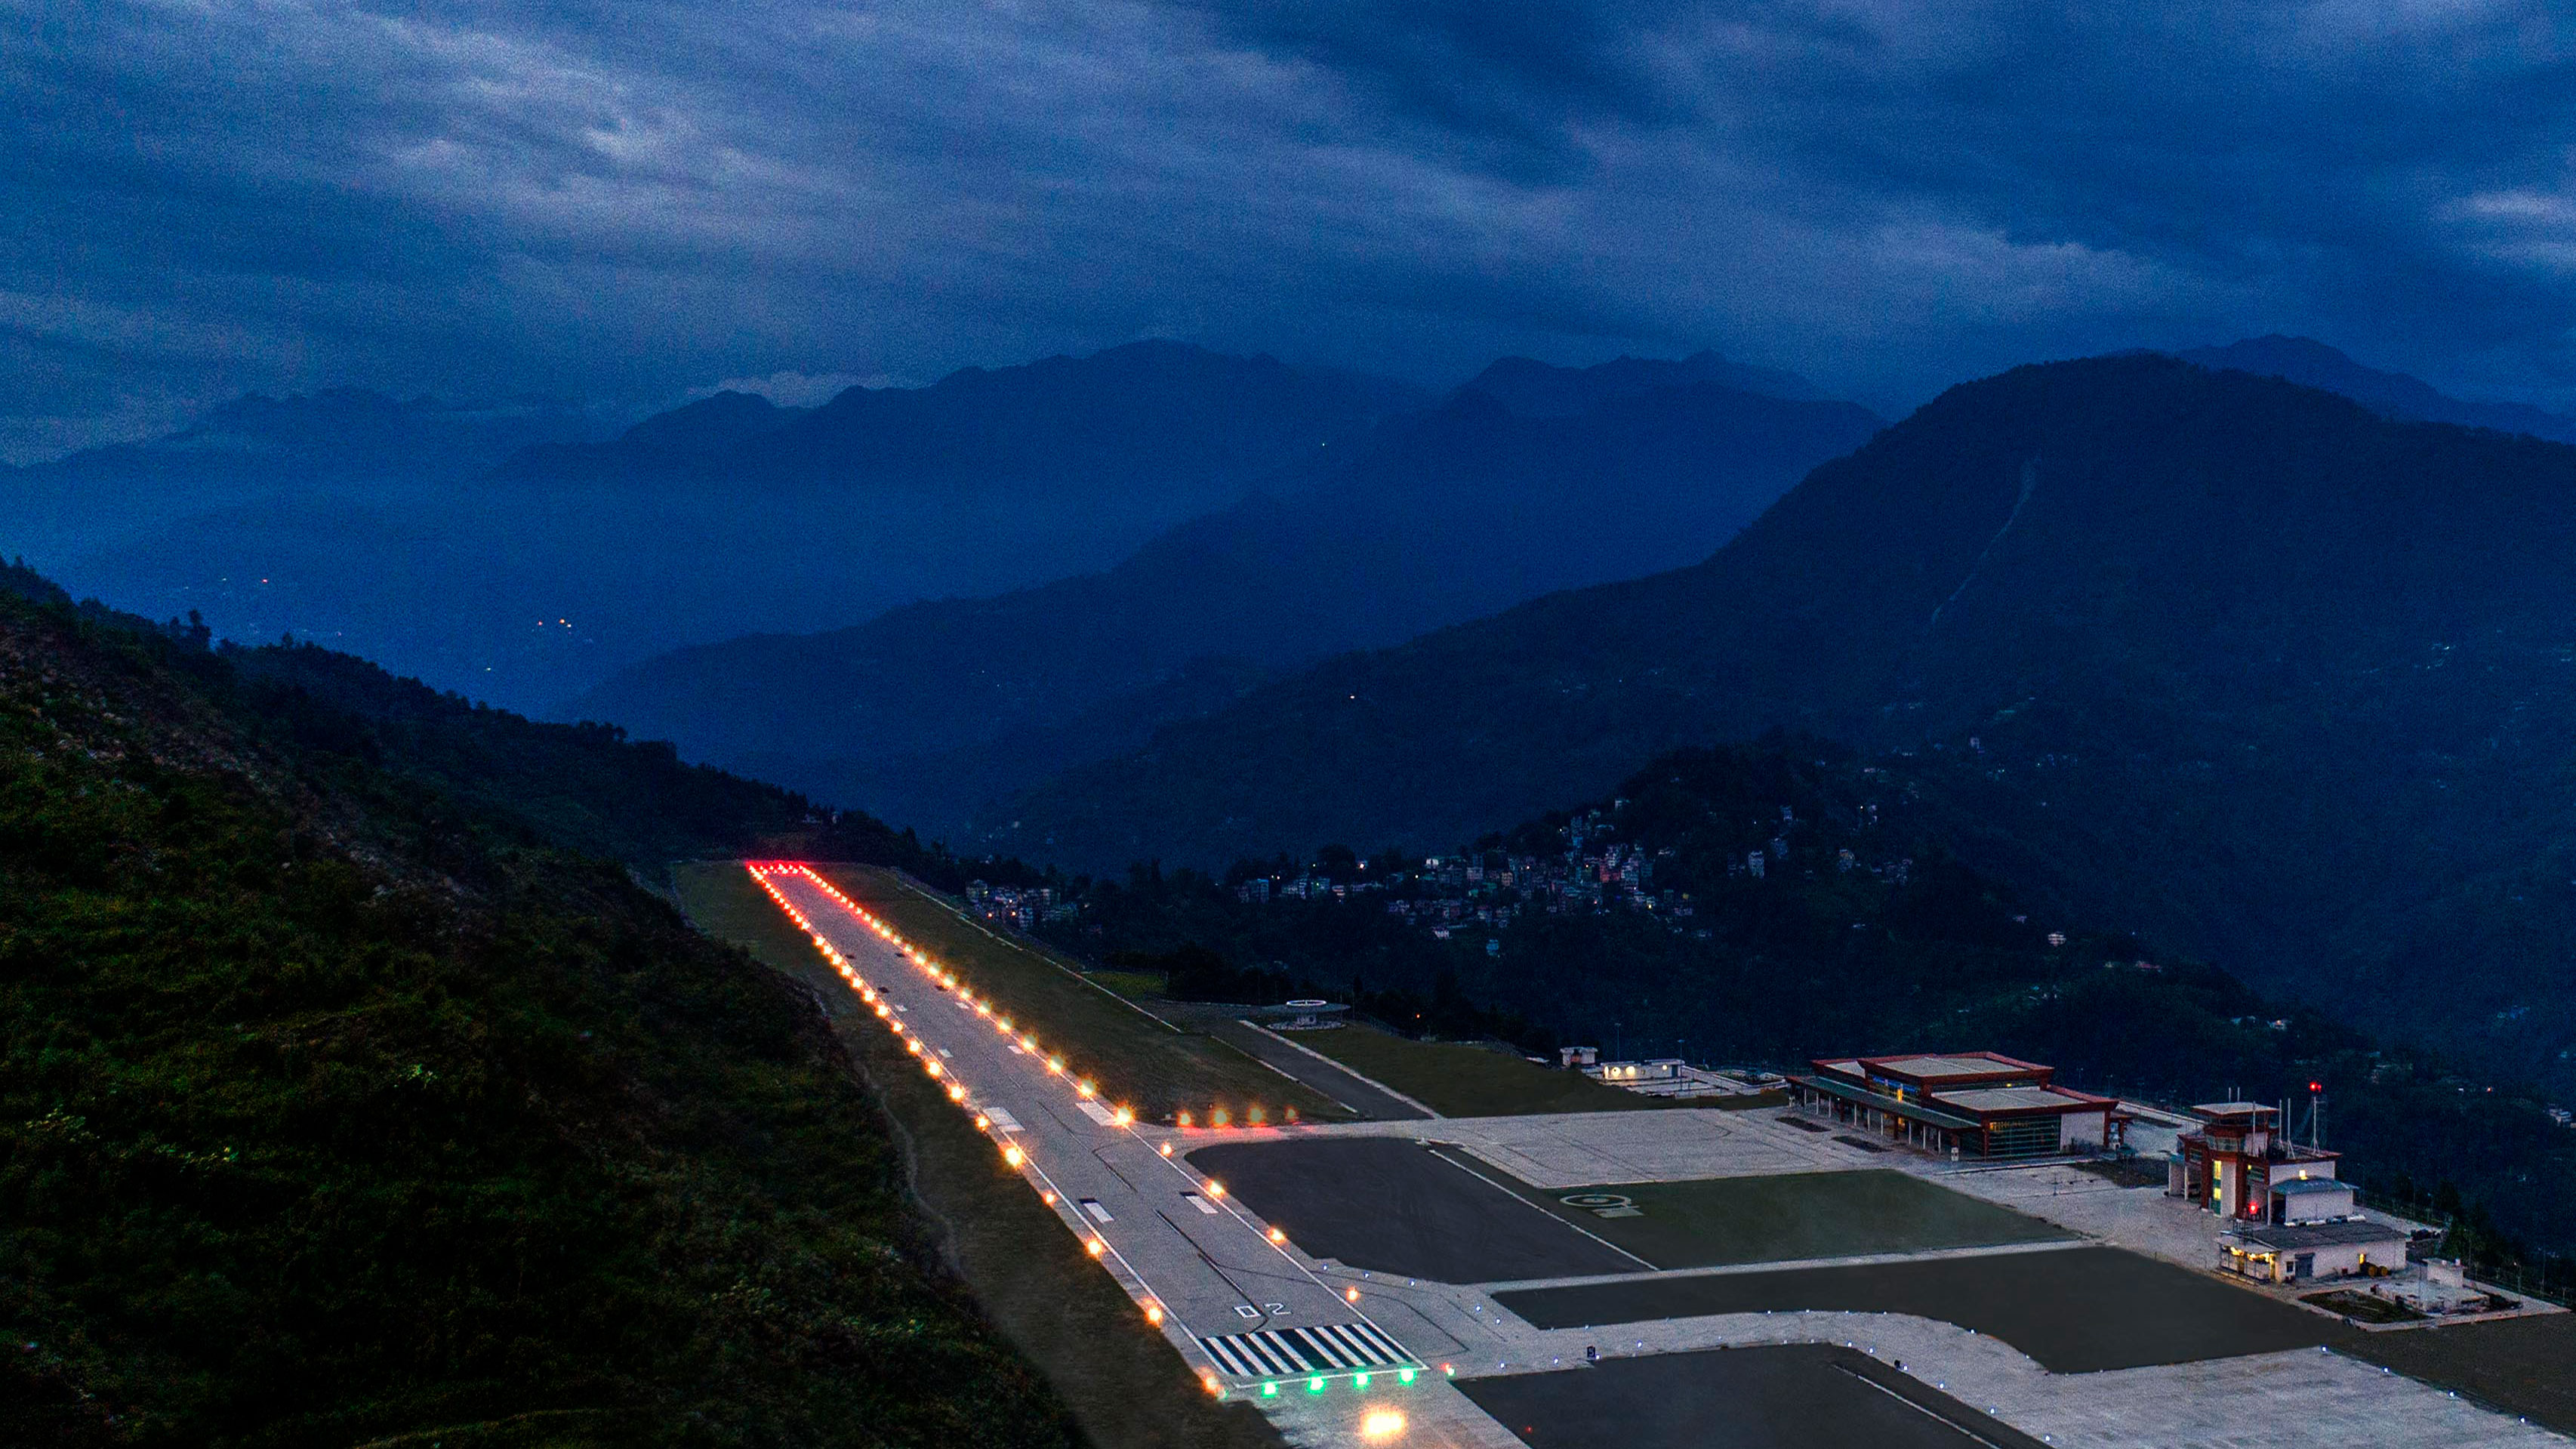 An engineering marvel in the midst of the Himalaya